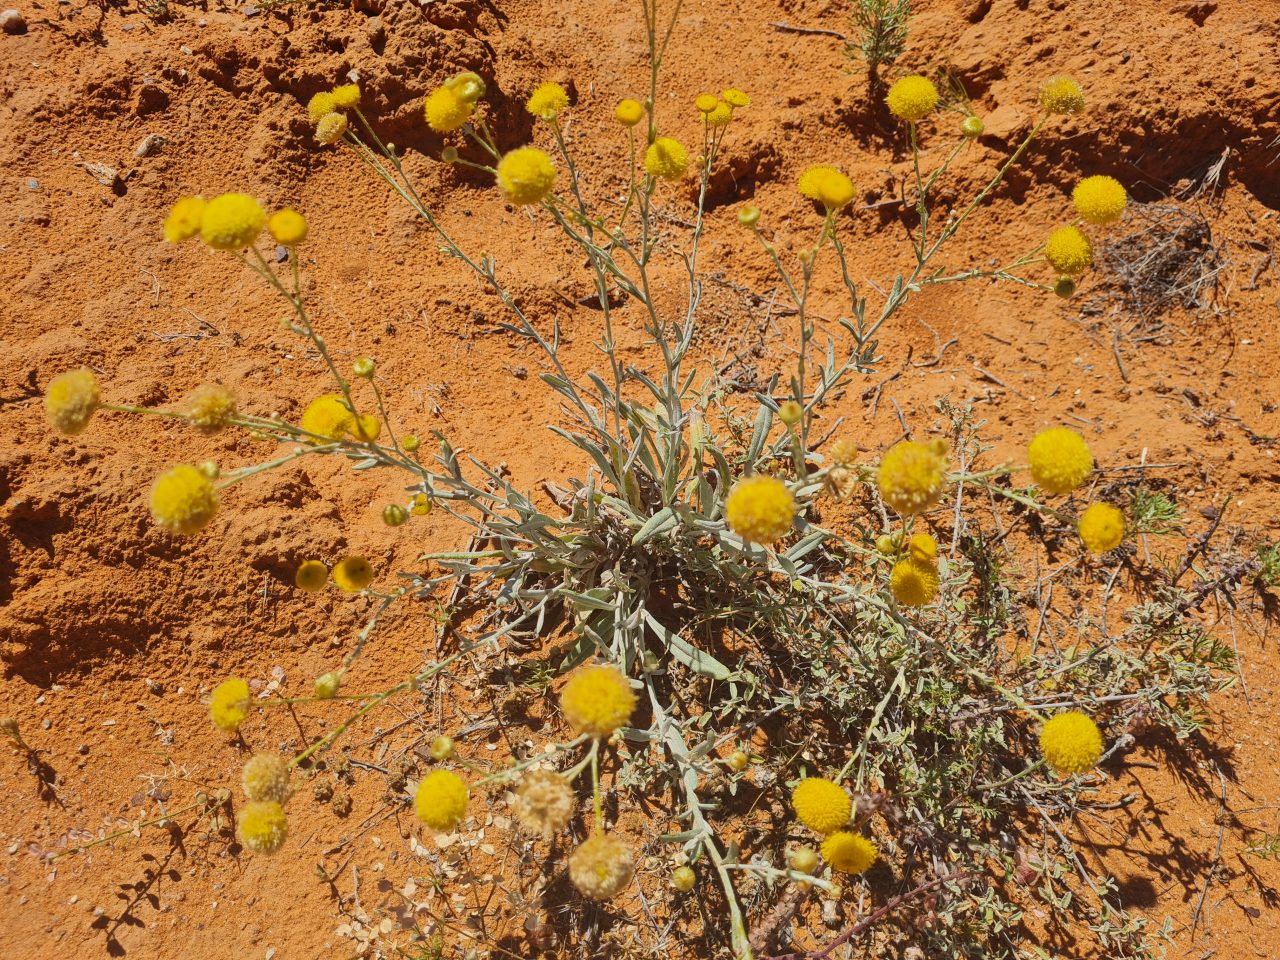 Close up photo of desert flowers that are bright yellow pom pom shaped at the end of very light green stems and leaves. The ground is bright orange soil